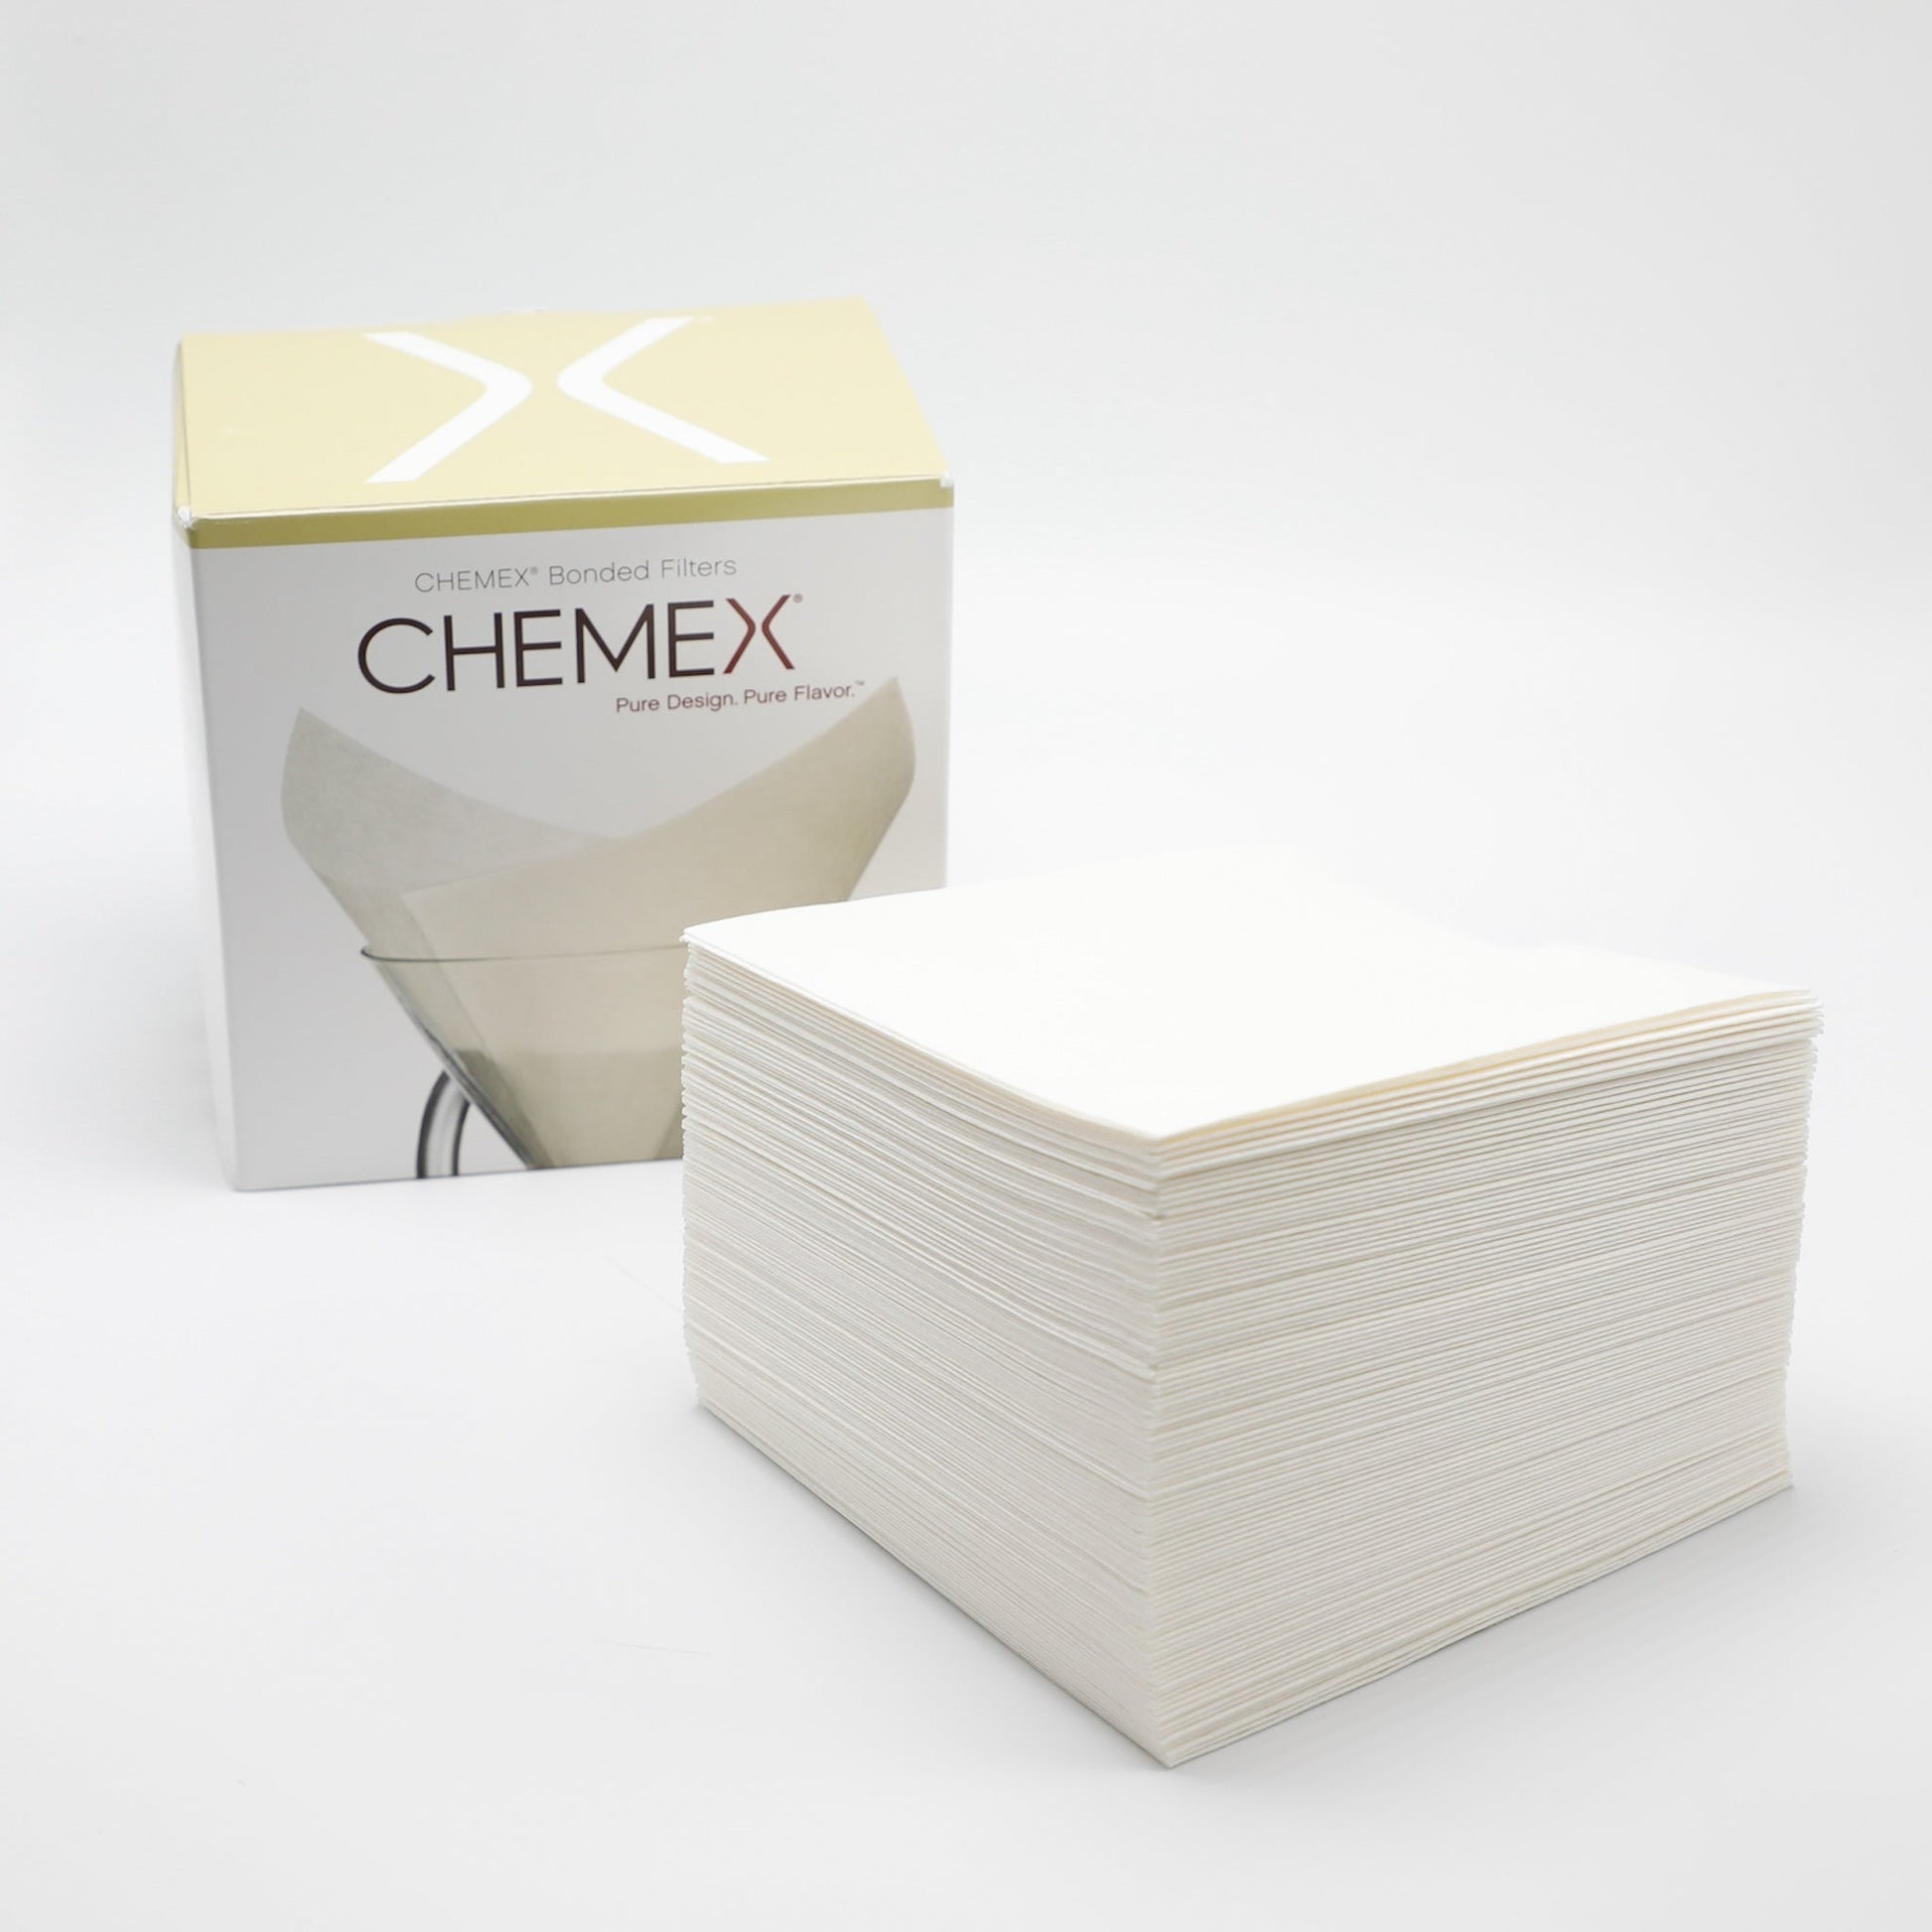 CHEMEX® Bonded Filters Pre-Folded Squares, 100 Count White - White Rock Coffee